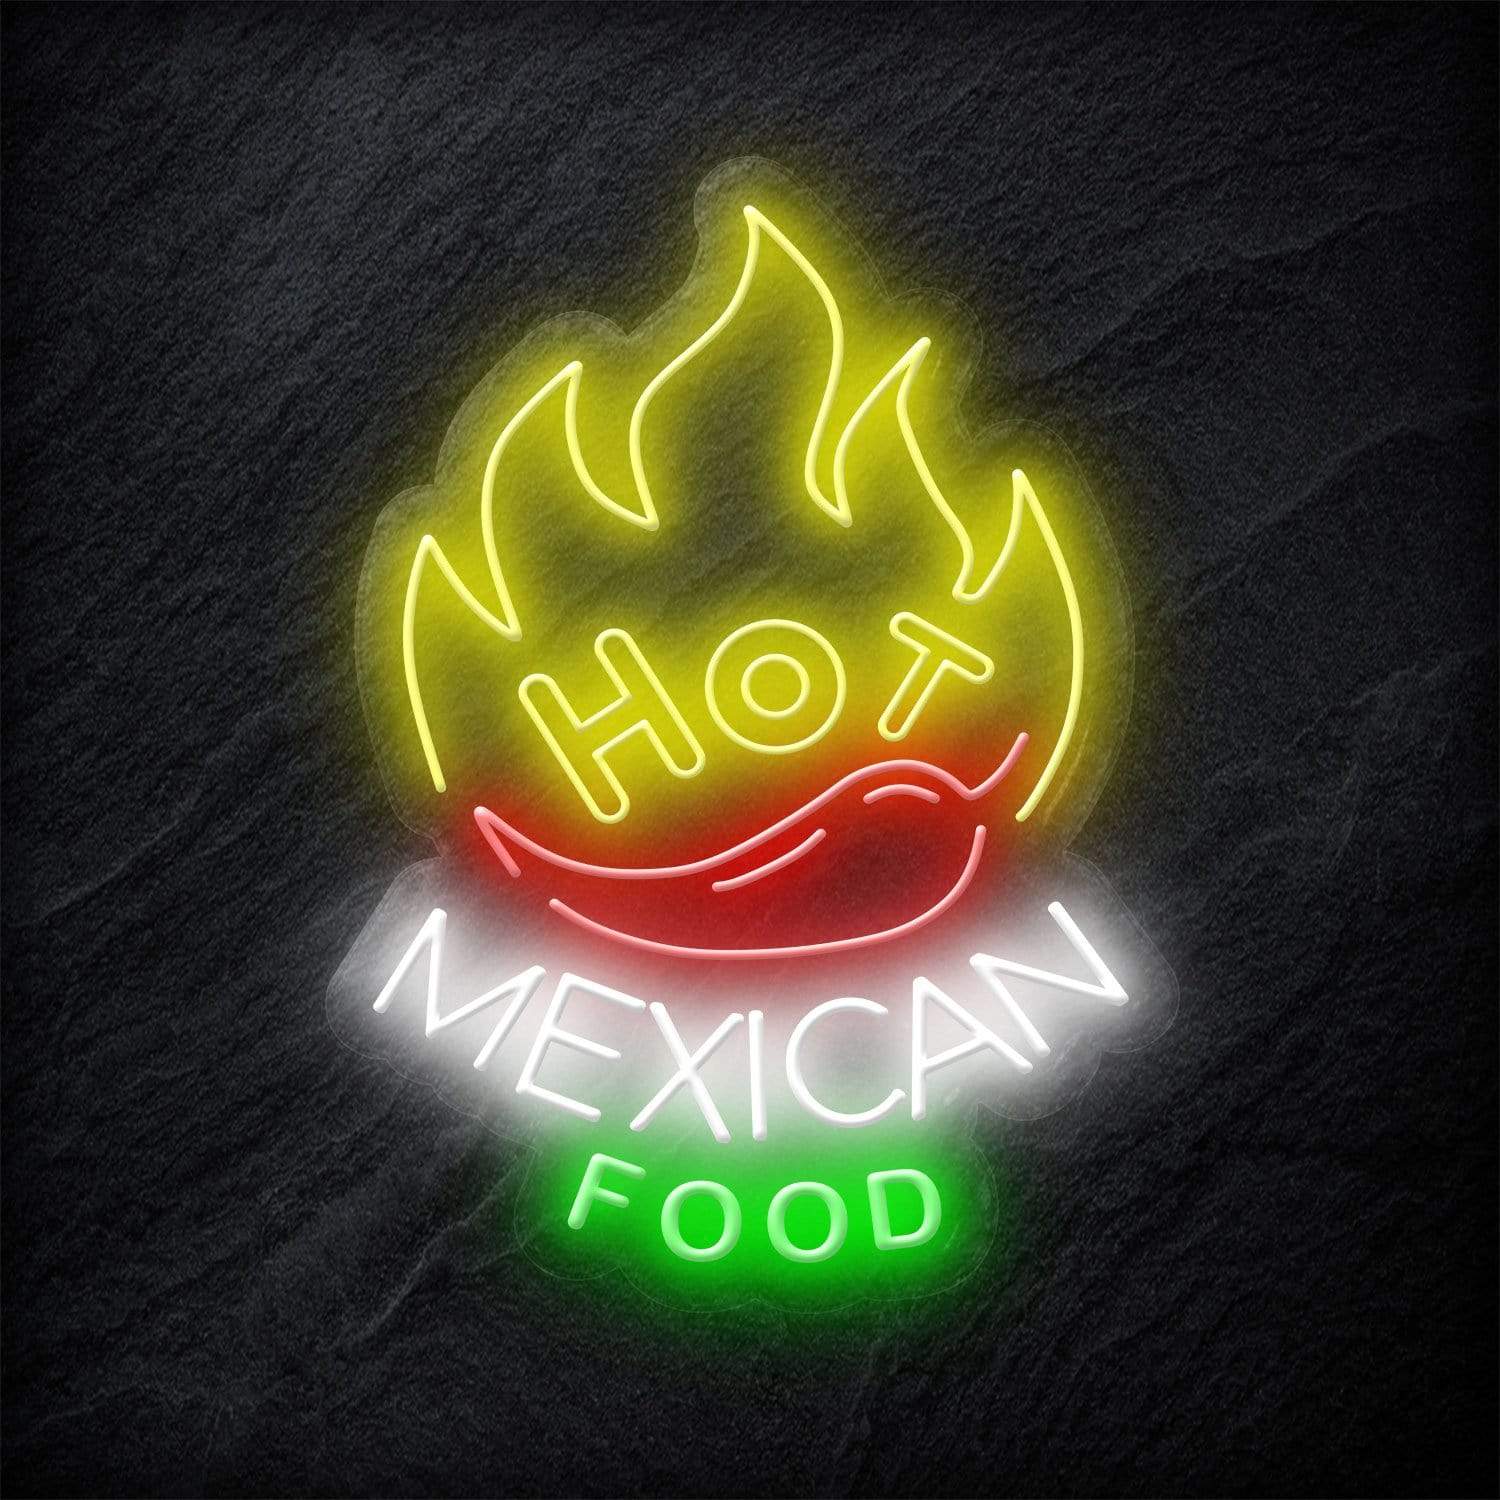 "Hot Mexican Food" LED - NEONEVERGLOW